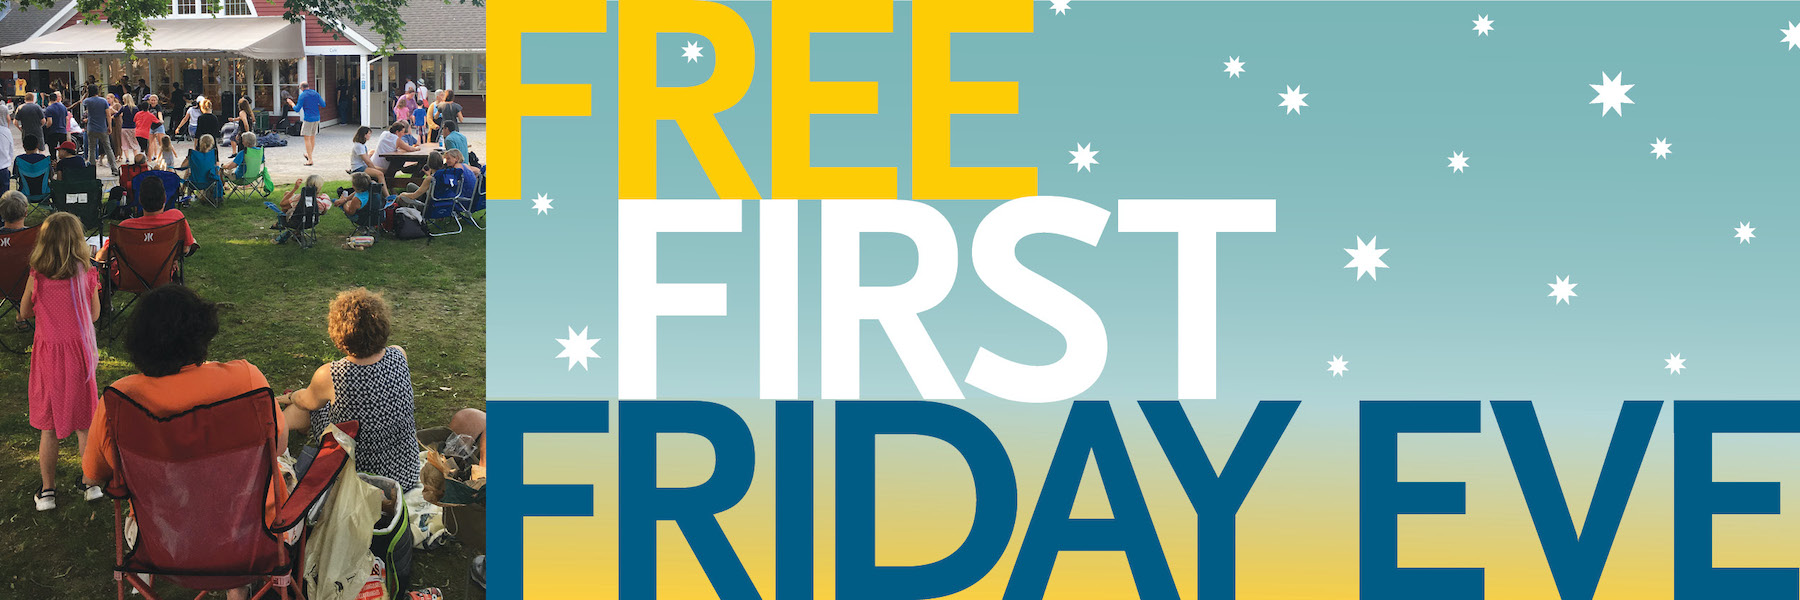 Free First Friday Eves Return to Shelburne Museum